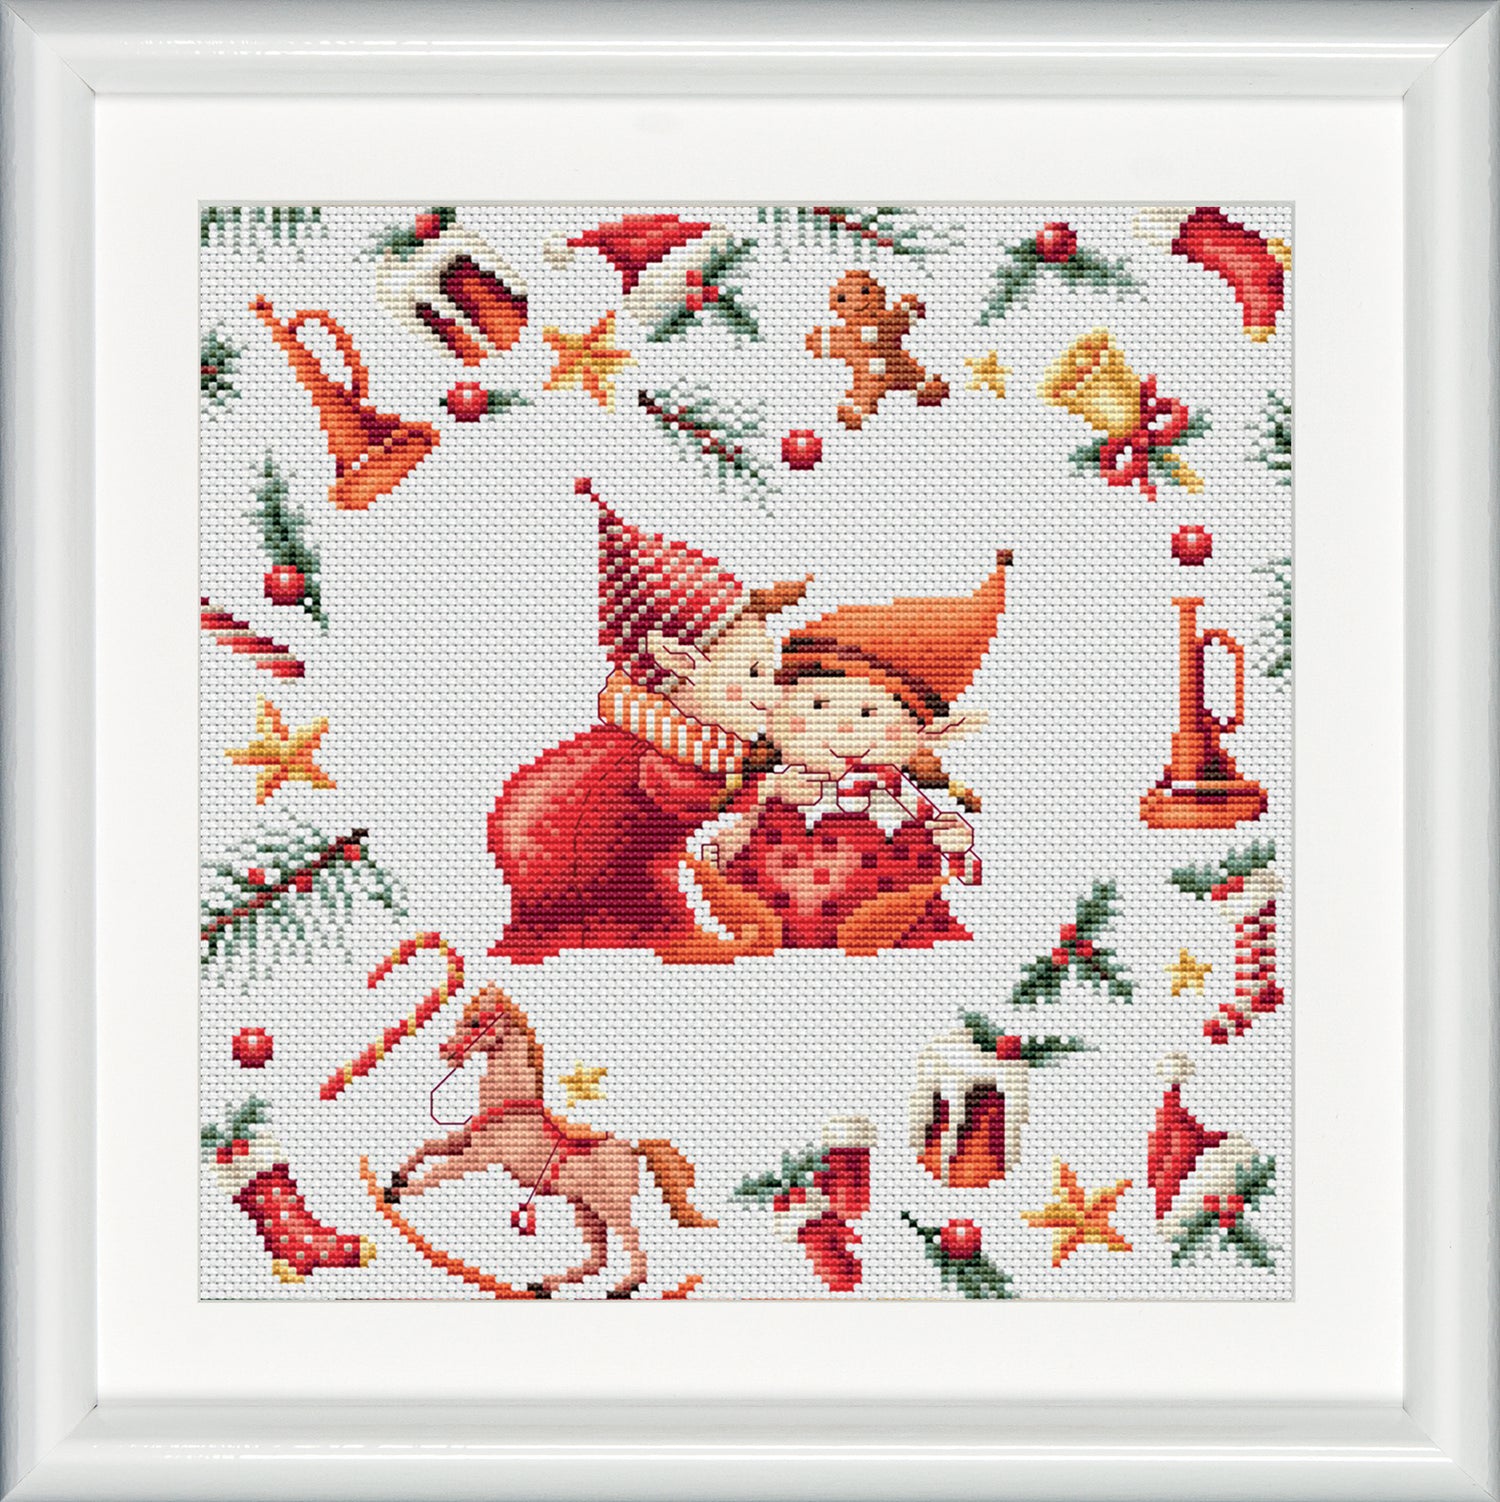 Three lovely embroidery designs of Christmas elves. This second design shows two elves hanging from a bright red christmas ornament. The colors red and green predominate in this design, which gives a true Christmas feeling! DSB cross stitch kits have easy to follow design charts and contain all items needed. 